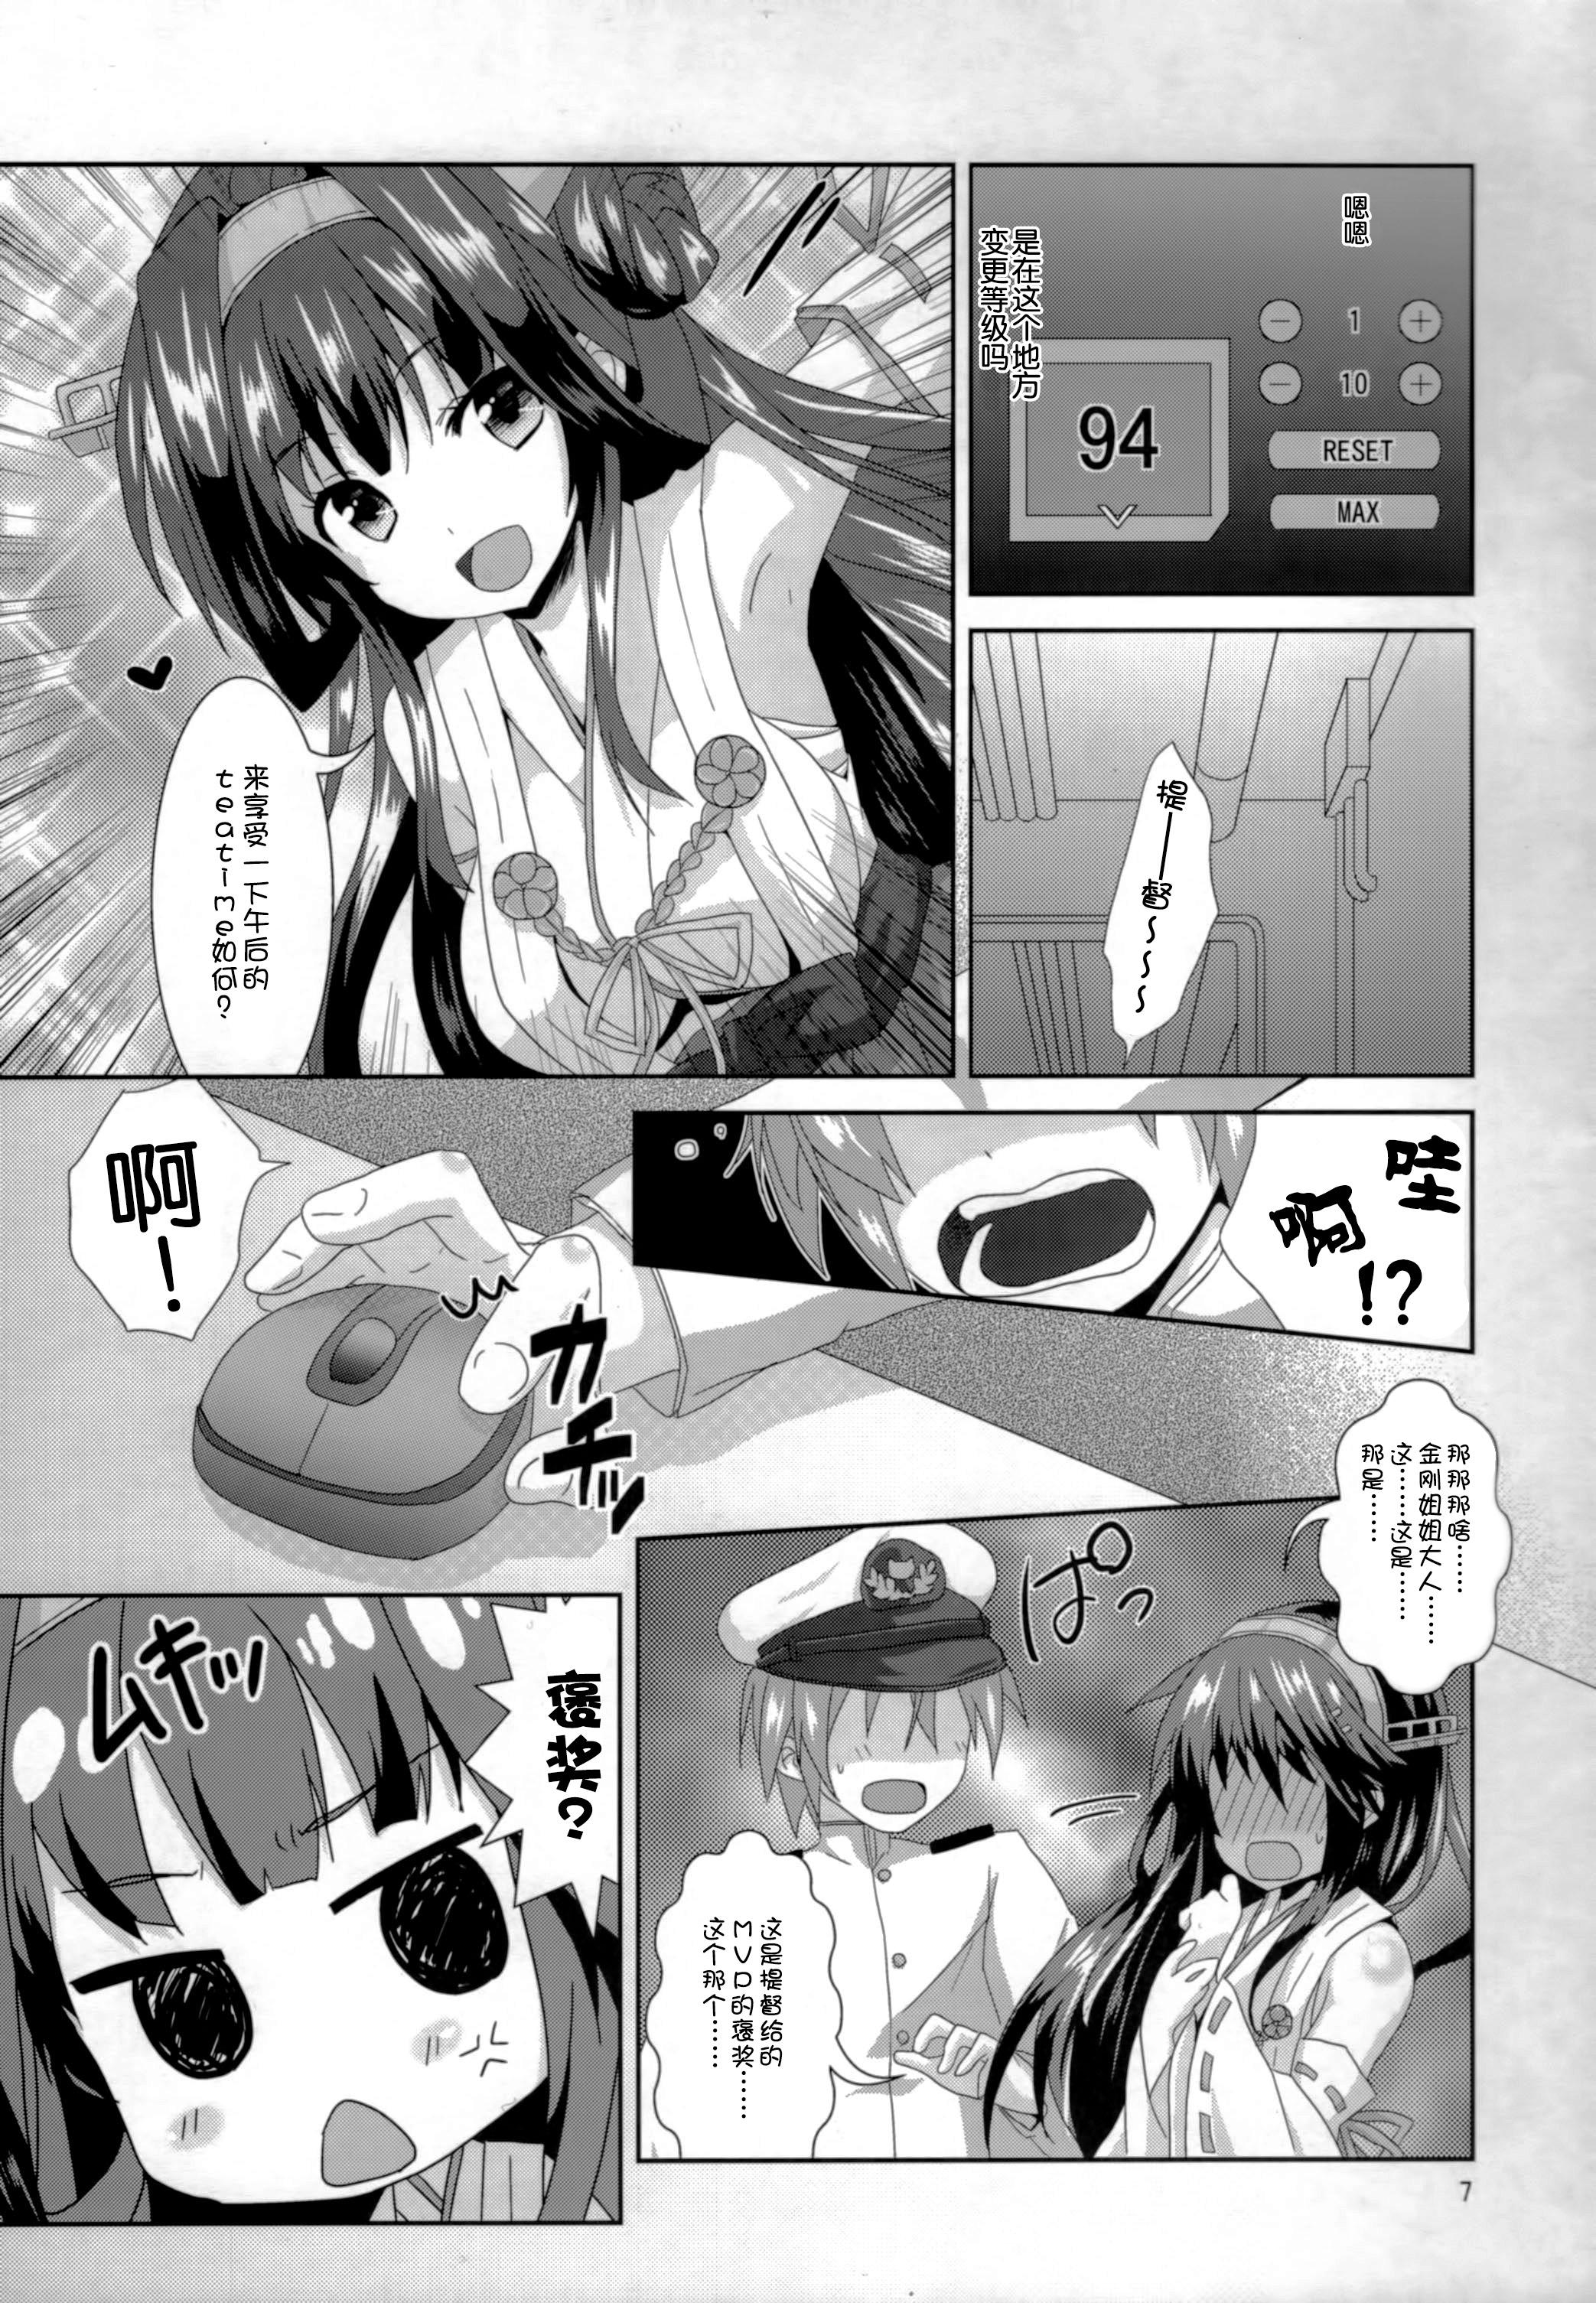 Bisexual Haruna Lv14 - Kantai collection Colombian - Page 7